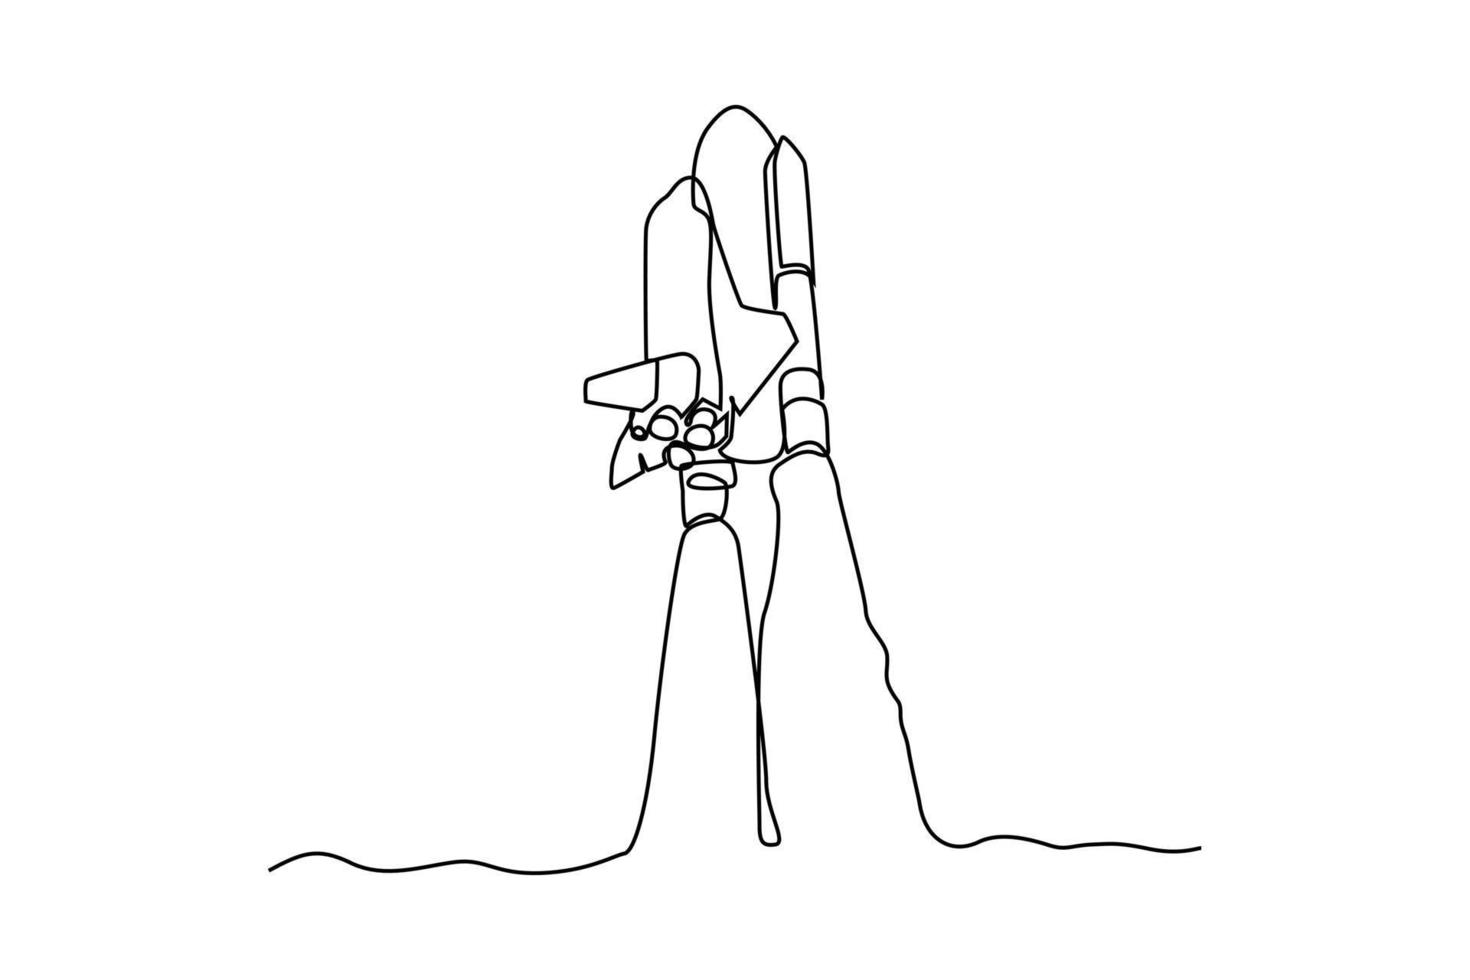 Continuous one line drawing rocket flying into space. Space concept. Single line draw design vector graphic illustration.